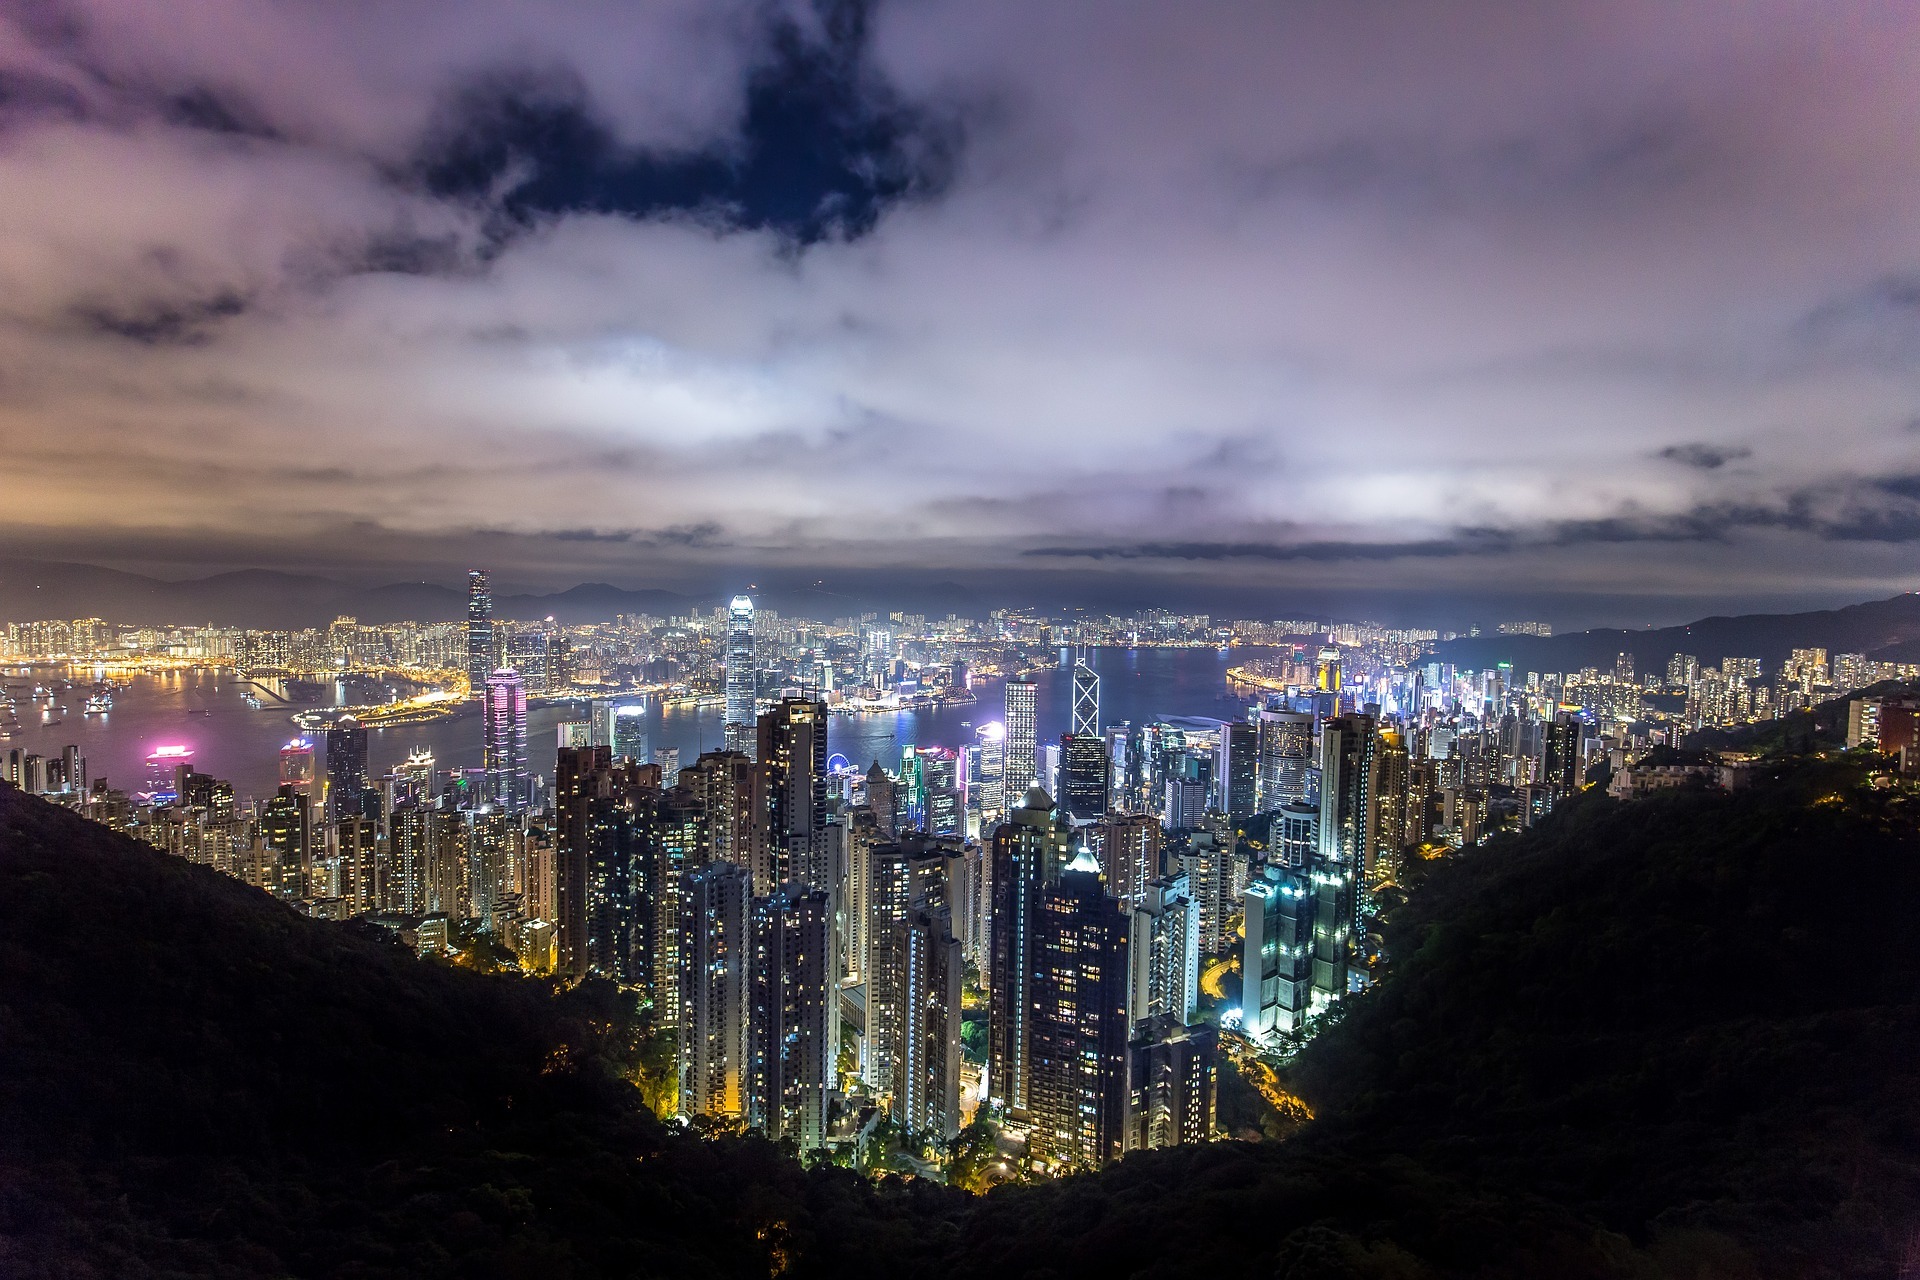 Going to Hong Kong for the first time is on my Travel Wishlist for 2020